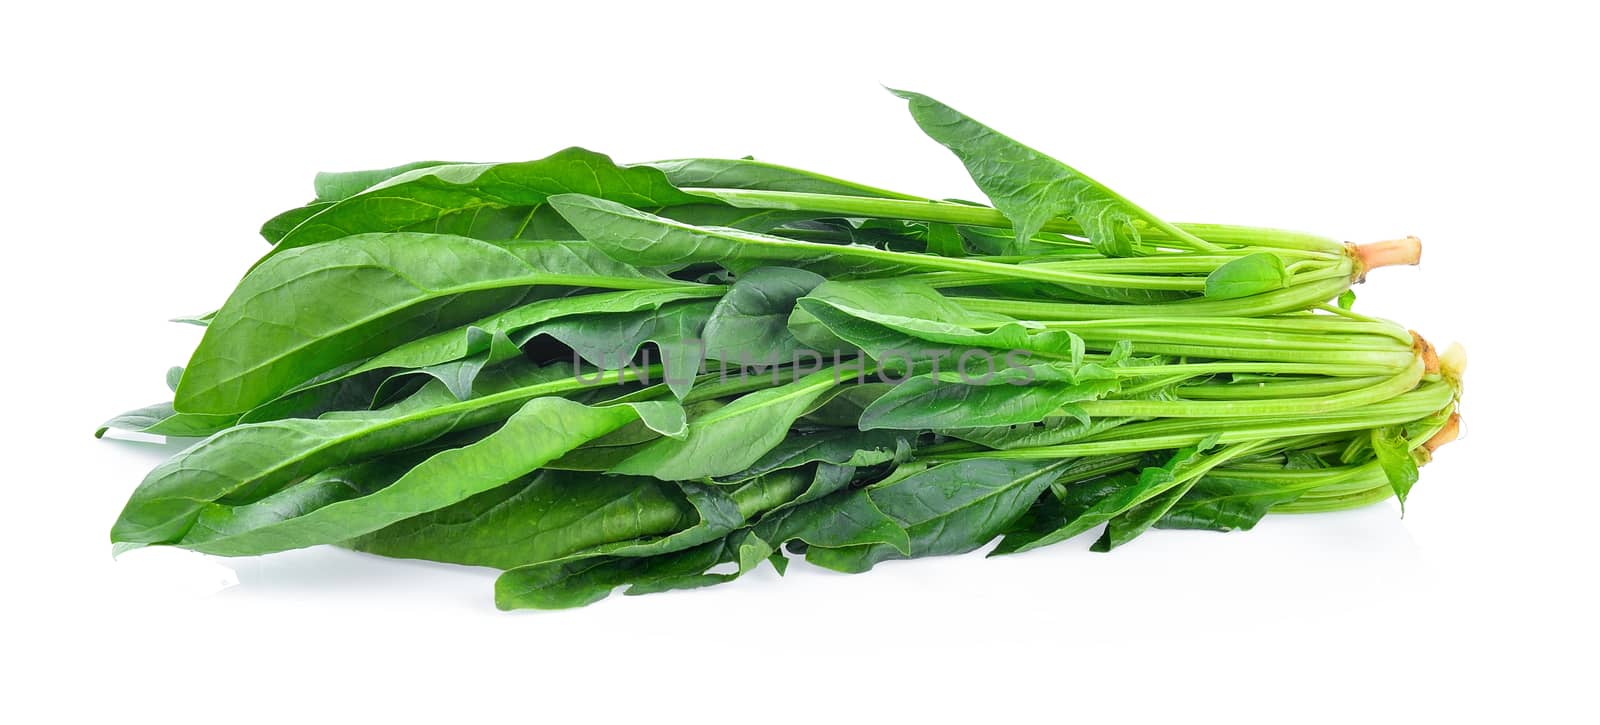 Spinach leaves isolated on white background by sommai